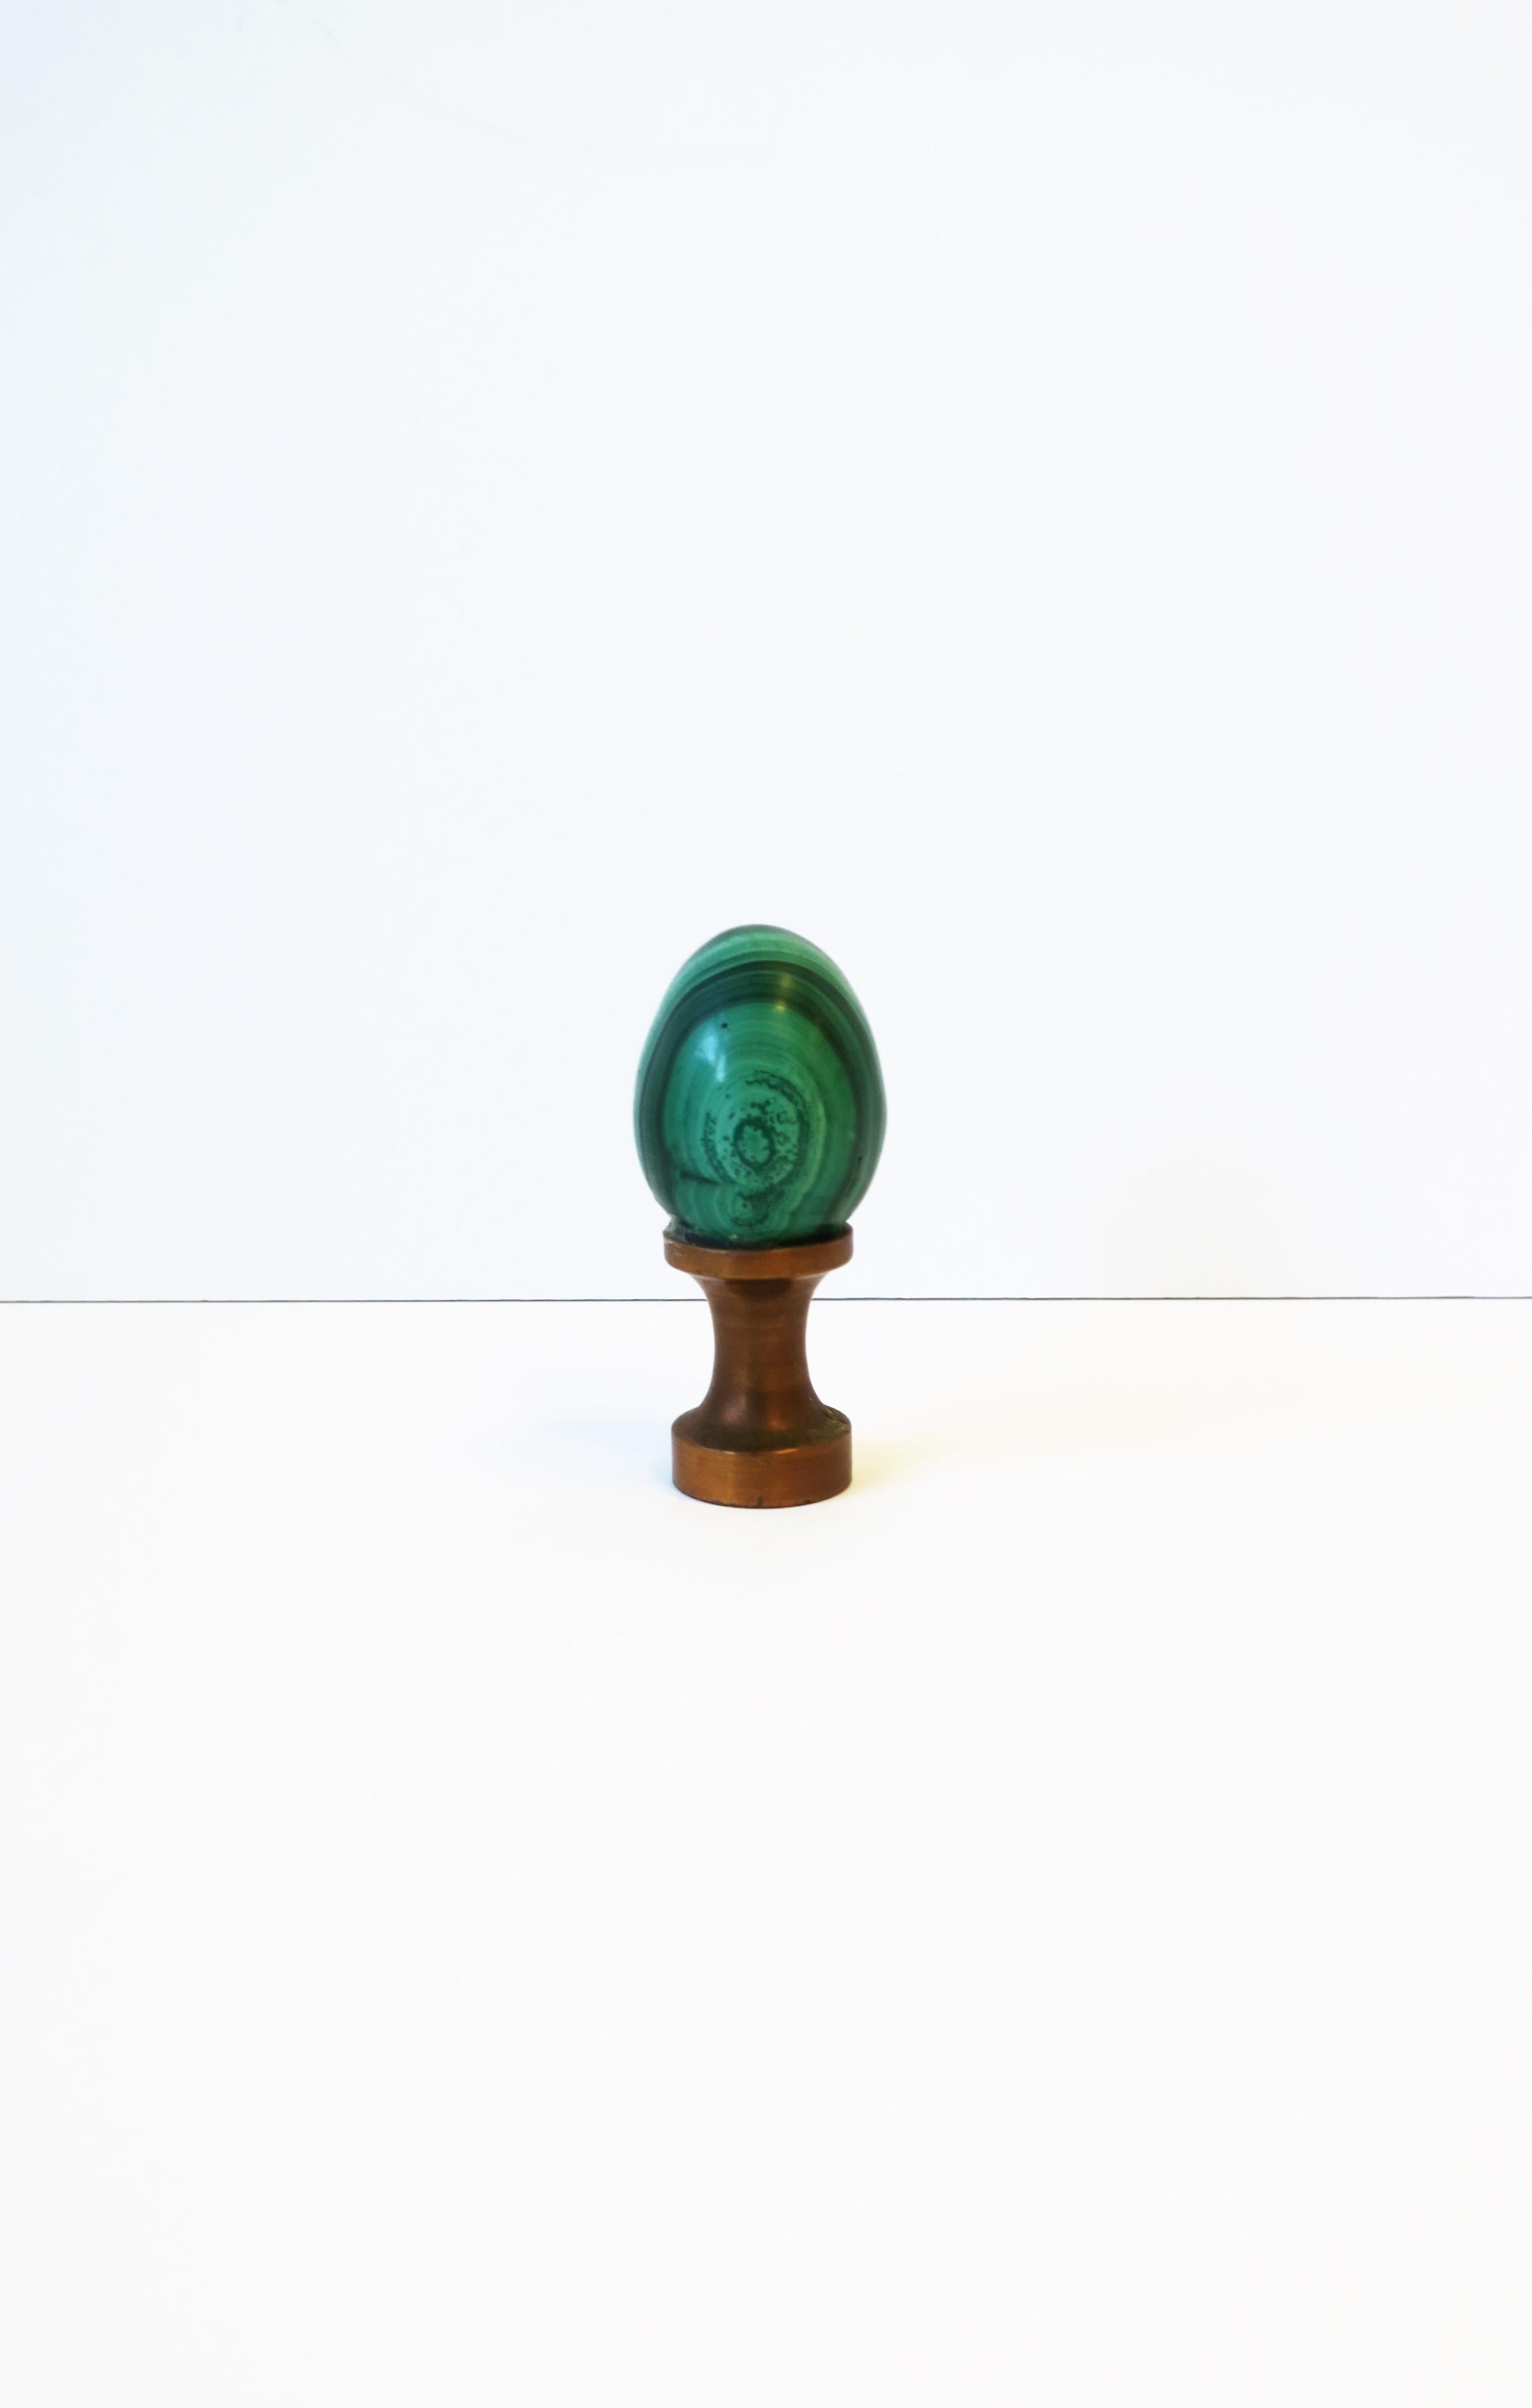 A small and beautiful green Malachite egg on copper base decorative object, circa 20th century. A green Malachite piece in egg shape form, polished smooth, adhered to a solid copper base. Piece is relatively small but substantial given its